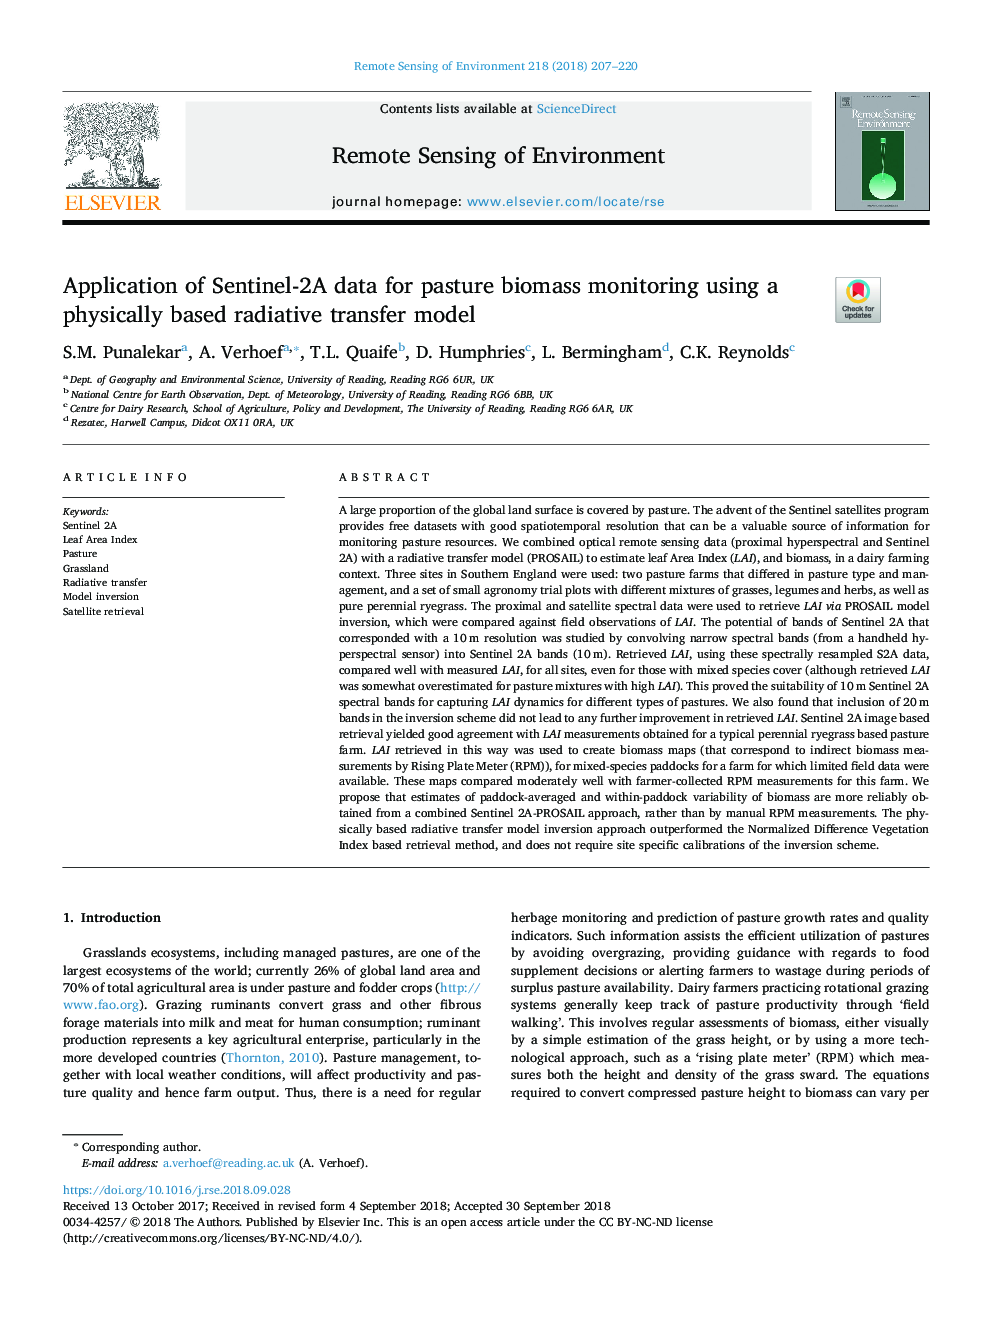 Application of Sentinel-2A data for pasture biomass monitoring using a physically based radiative transfer model